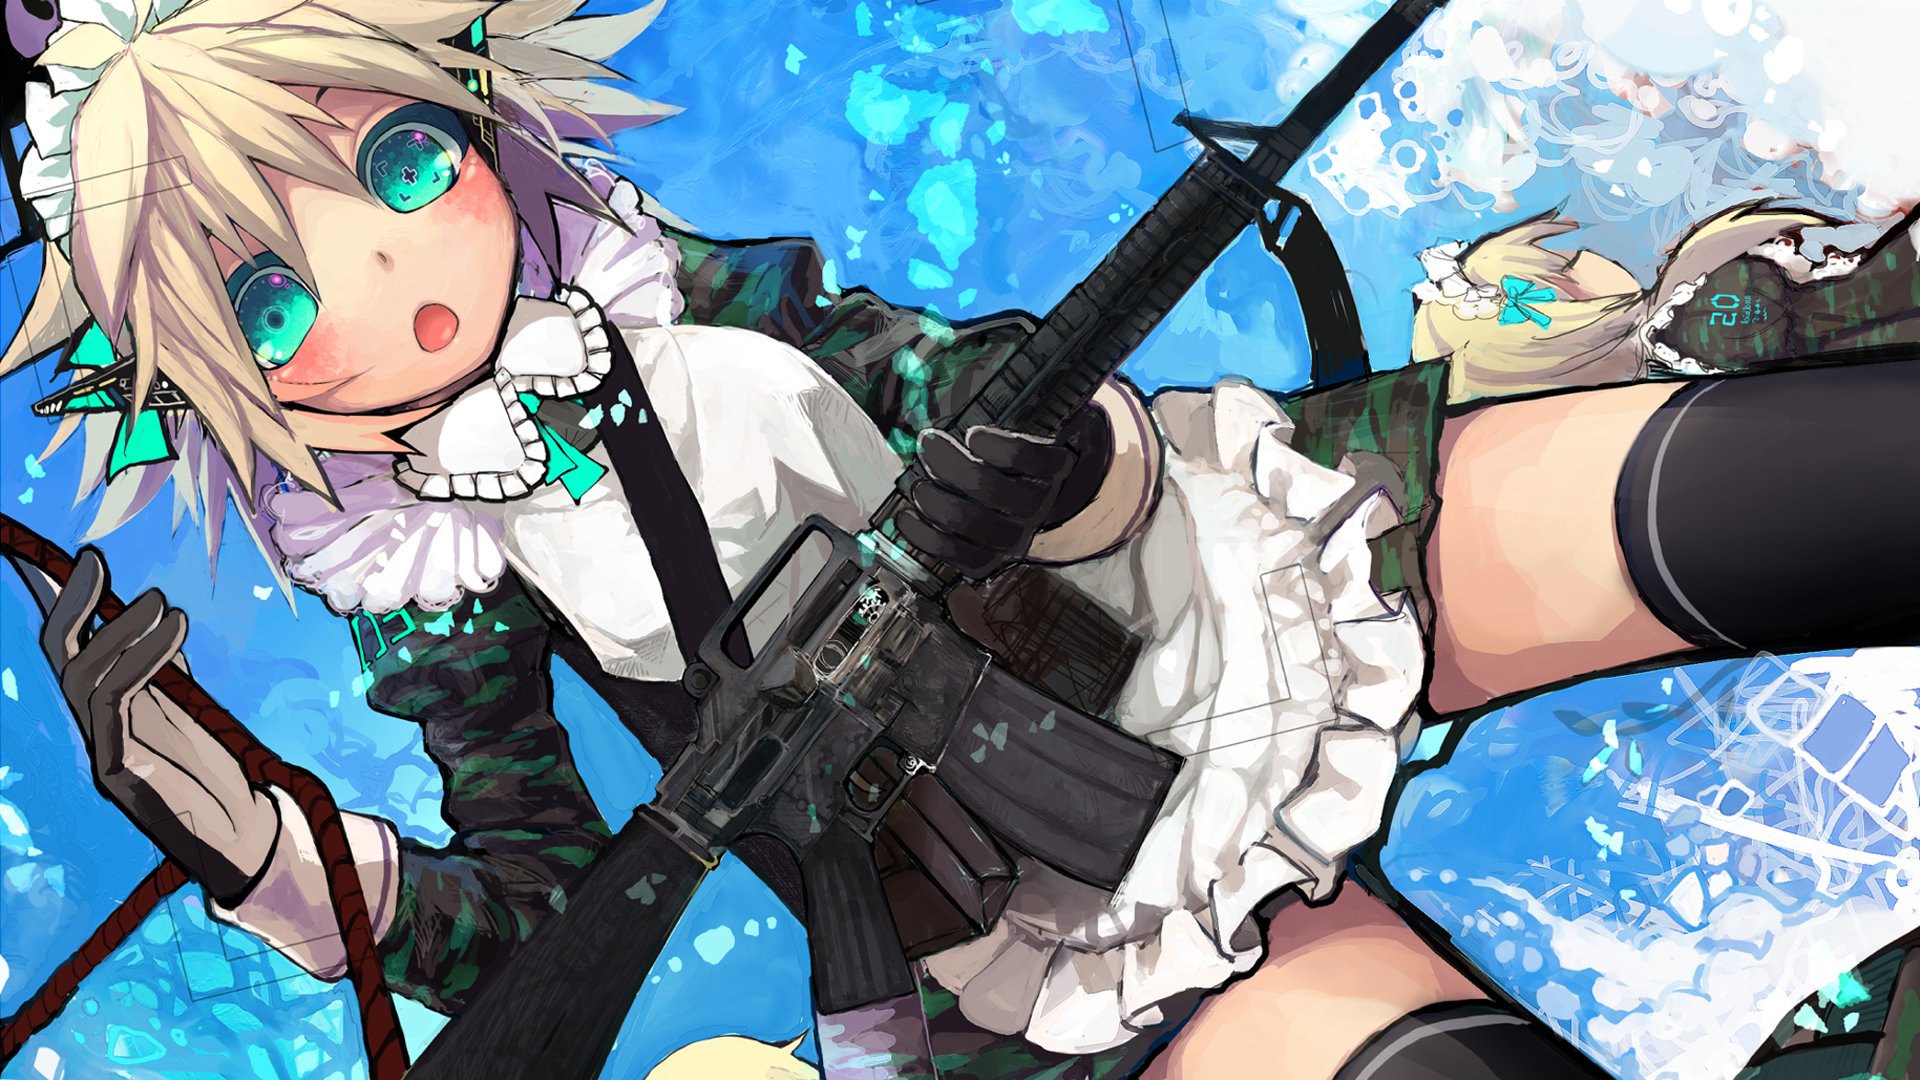 blondes, Rifles, Ecchi, Maids, Skirts, Weapons, Short, Hair, Assault,  Rifle, Anime, M16a4, Aqua, Eyes, Anime, Girls Wallpapers HD / Desktop and  Mobile Backgrounds